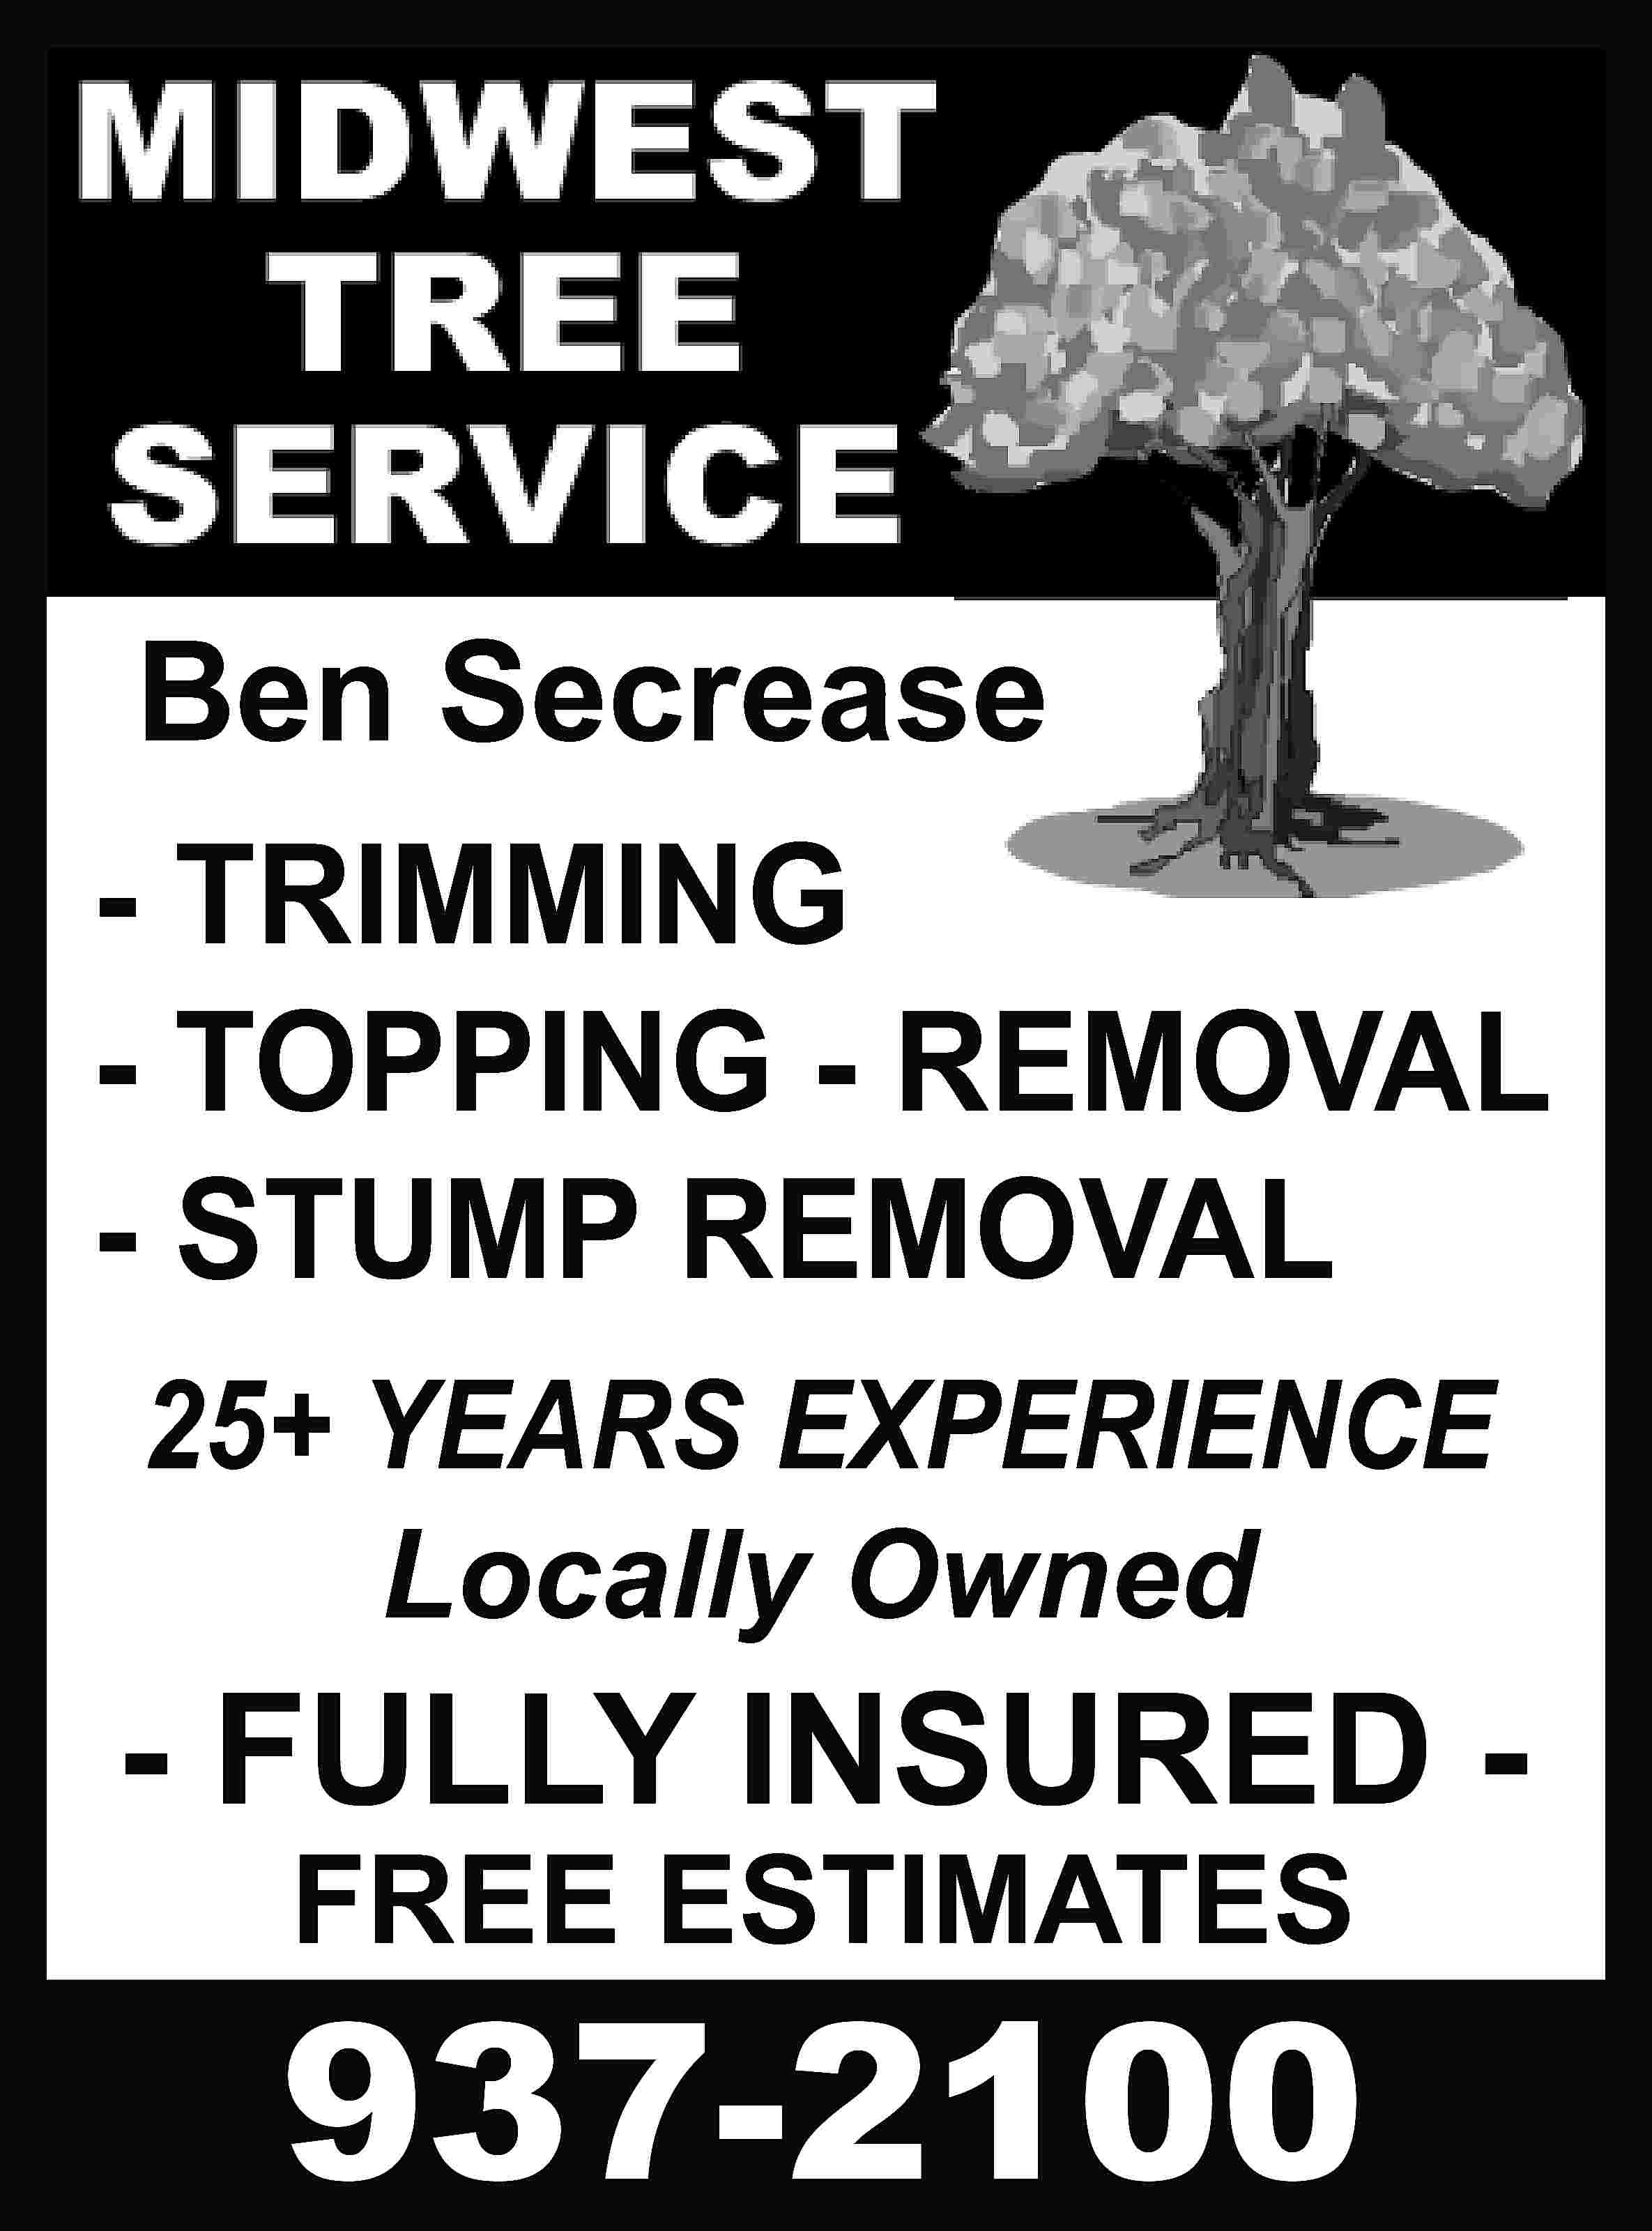 Ben Secrease - TRIMMING -  Ben Secrease - TRIMMING - TOPPING - REMOVAL - STUMP REMOVAL 25+ YEARS EXPERIENCE Locally Owned - FULLY INSURED FREE ESTIMATES 937-2100